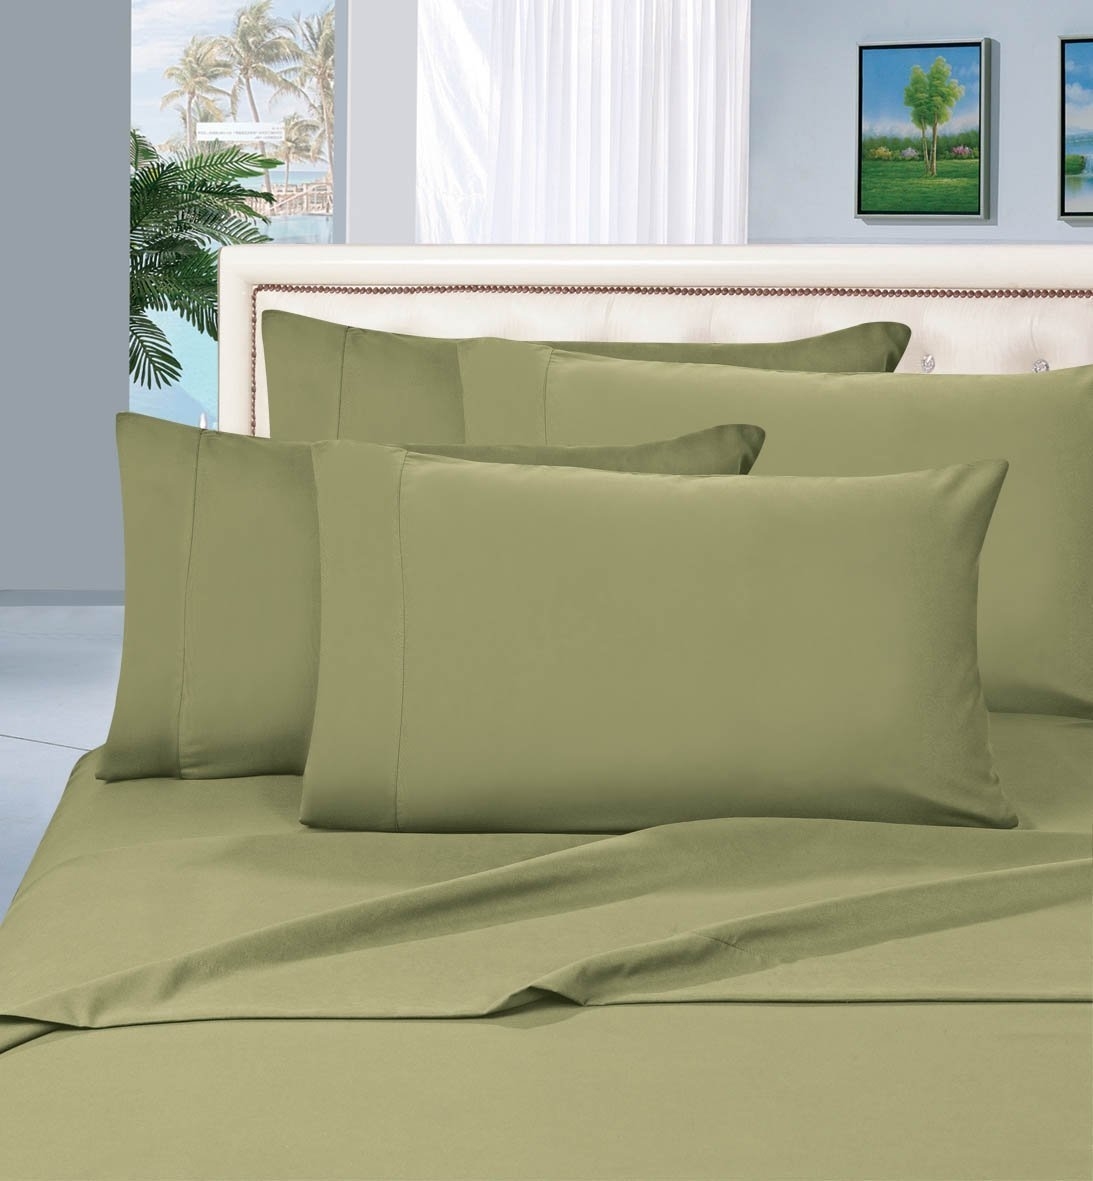 Elegant Comfort 1500 Series Wrinkle Resistant Egyptian Quality Hypoallergenic Ultra Soft Luxury 4-piece Bed Sheet Set, Full, Sage-green